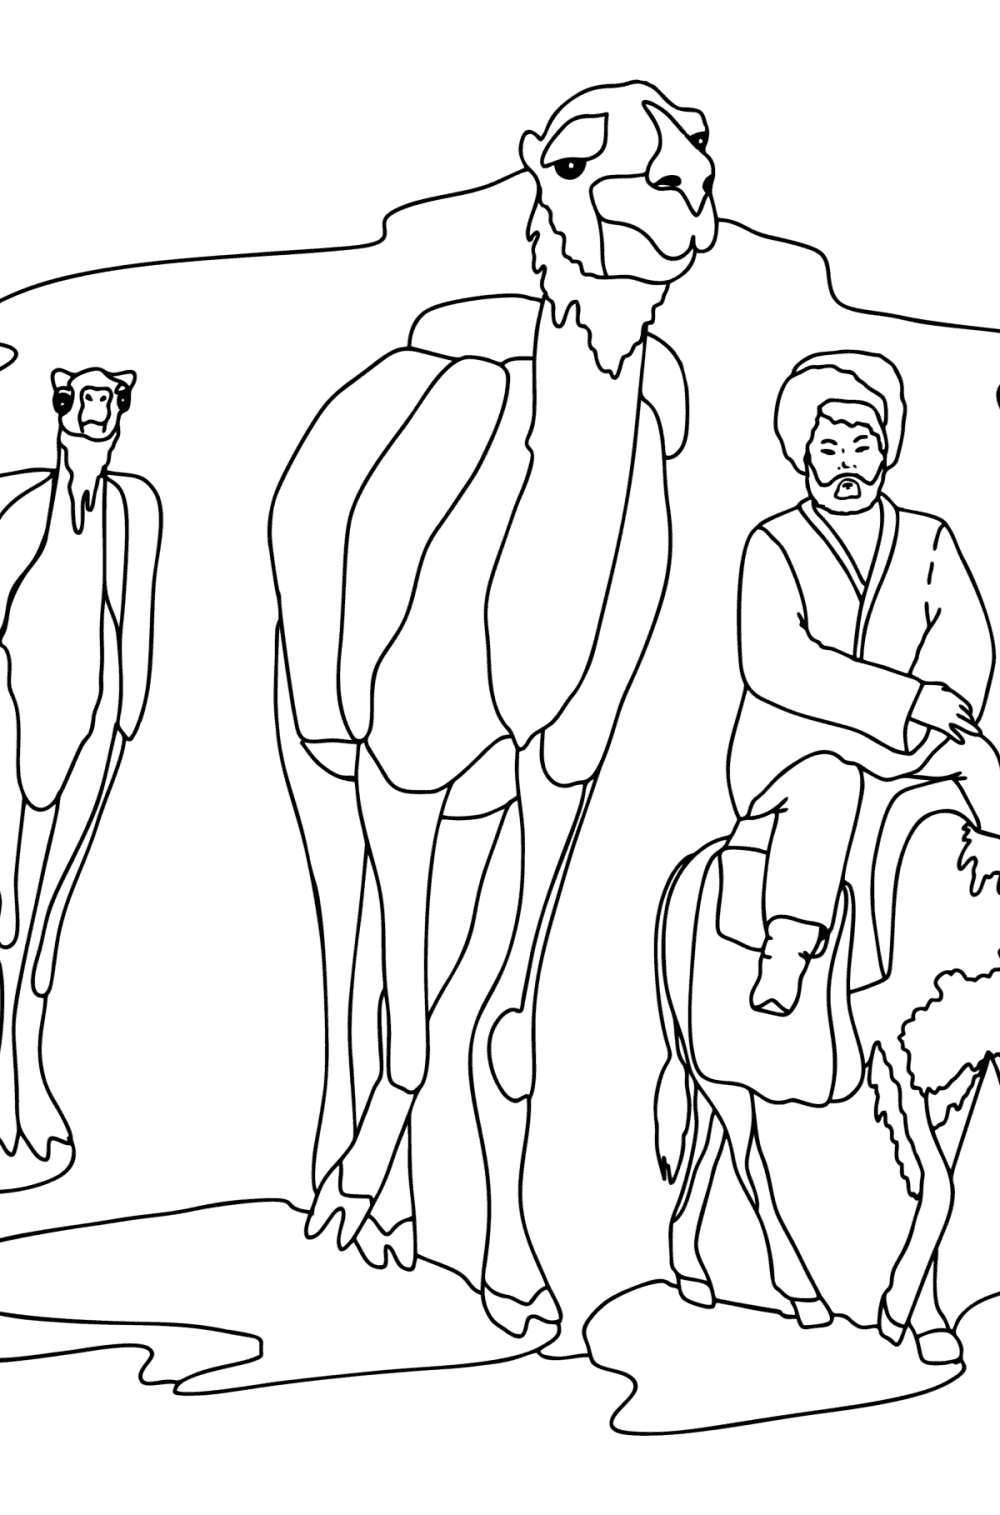 Camels coloring pages for Adults - Online or Printable